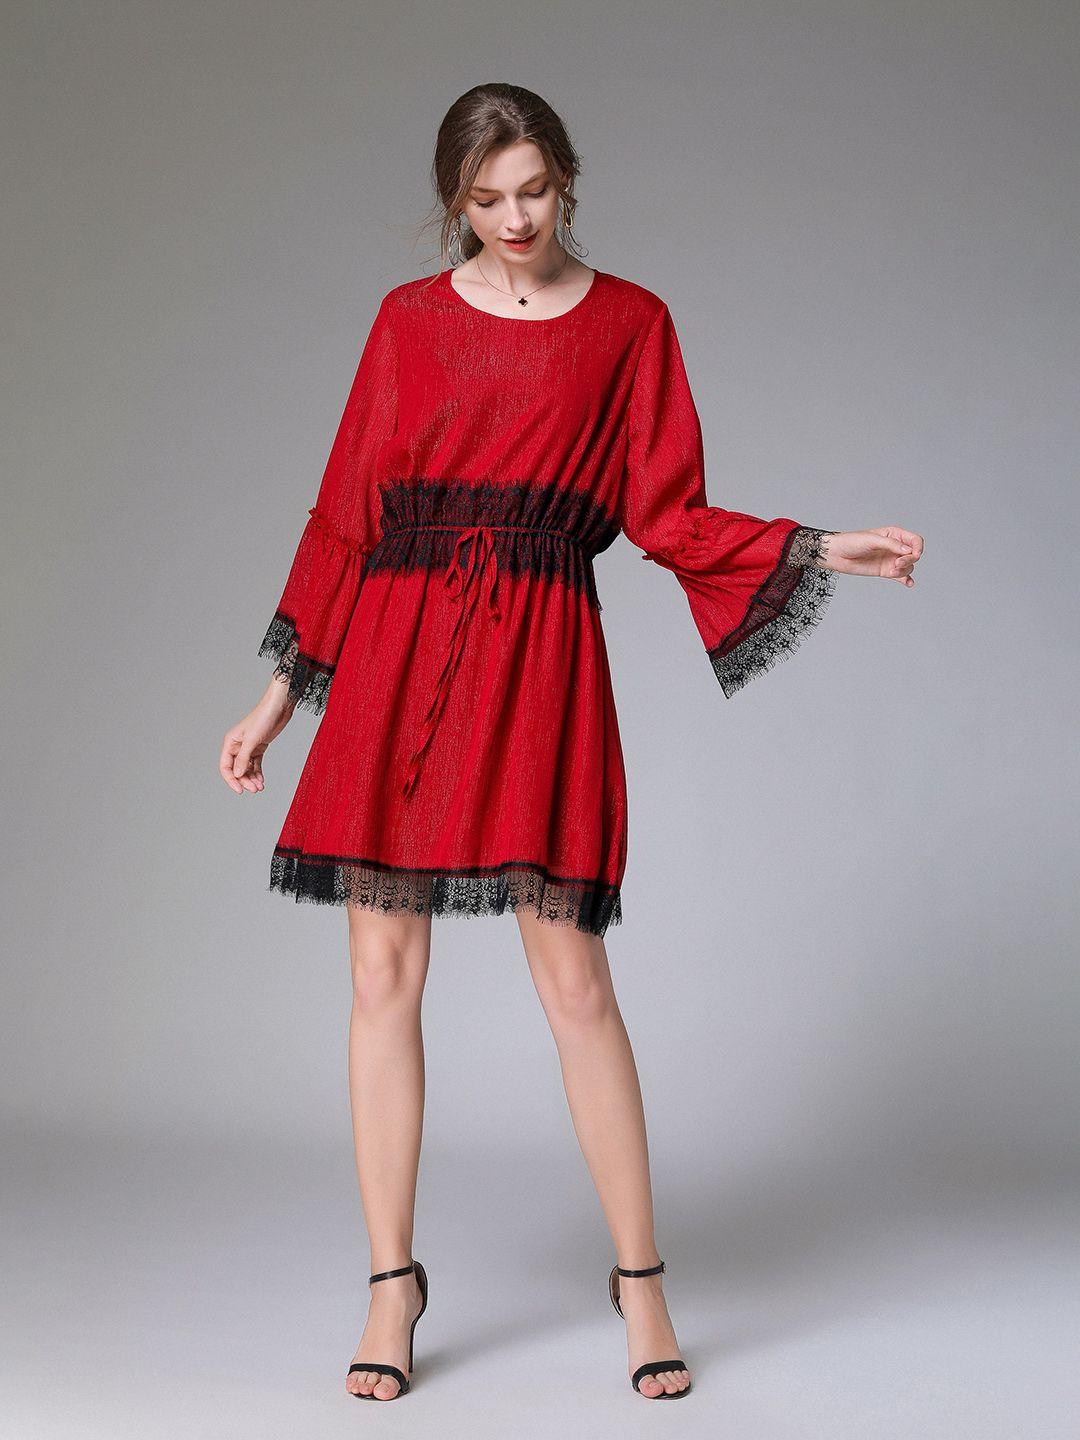 jc collection bell sleeves fit & flare dress